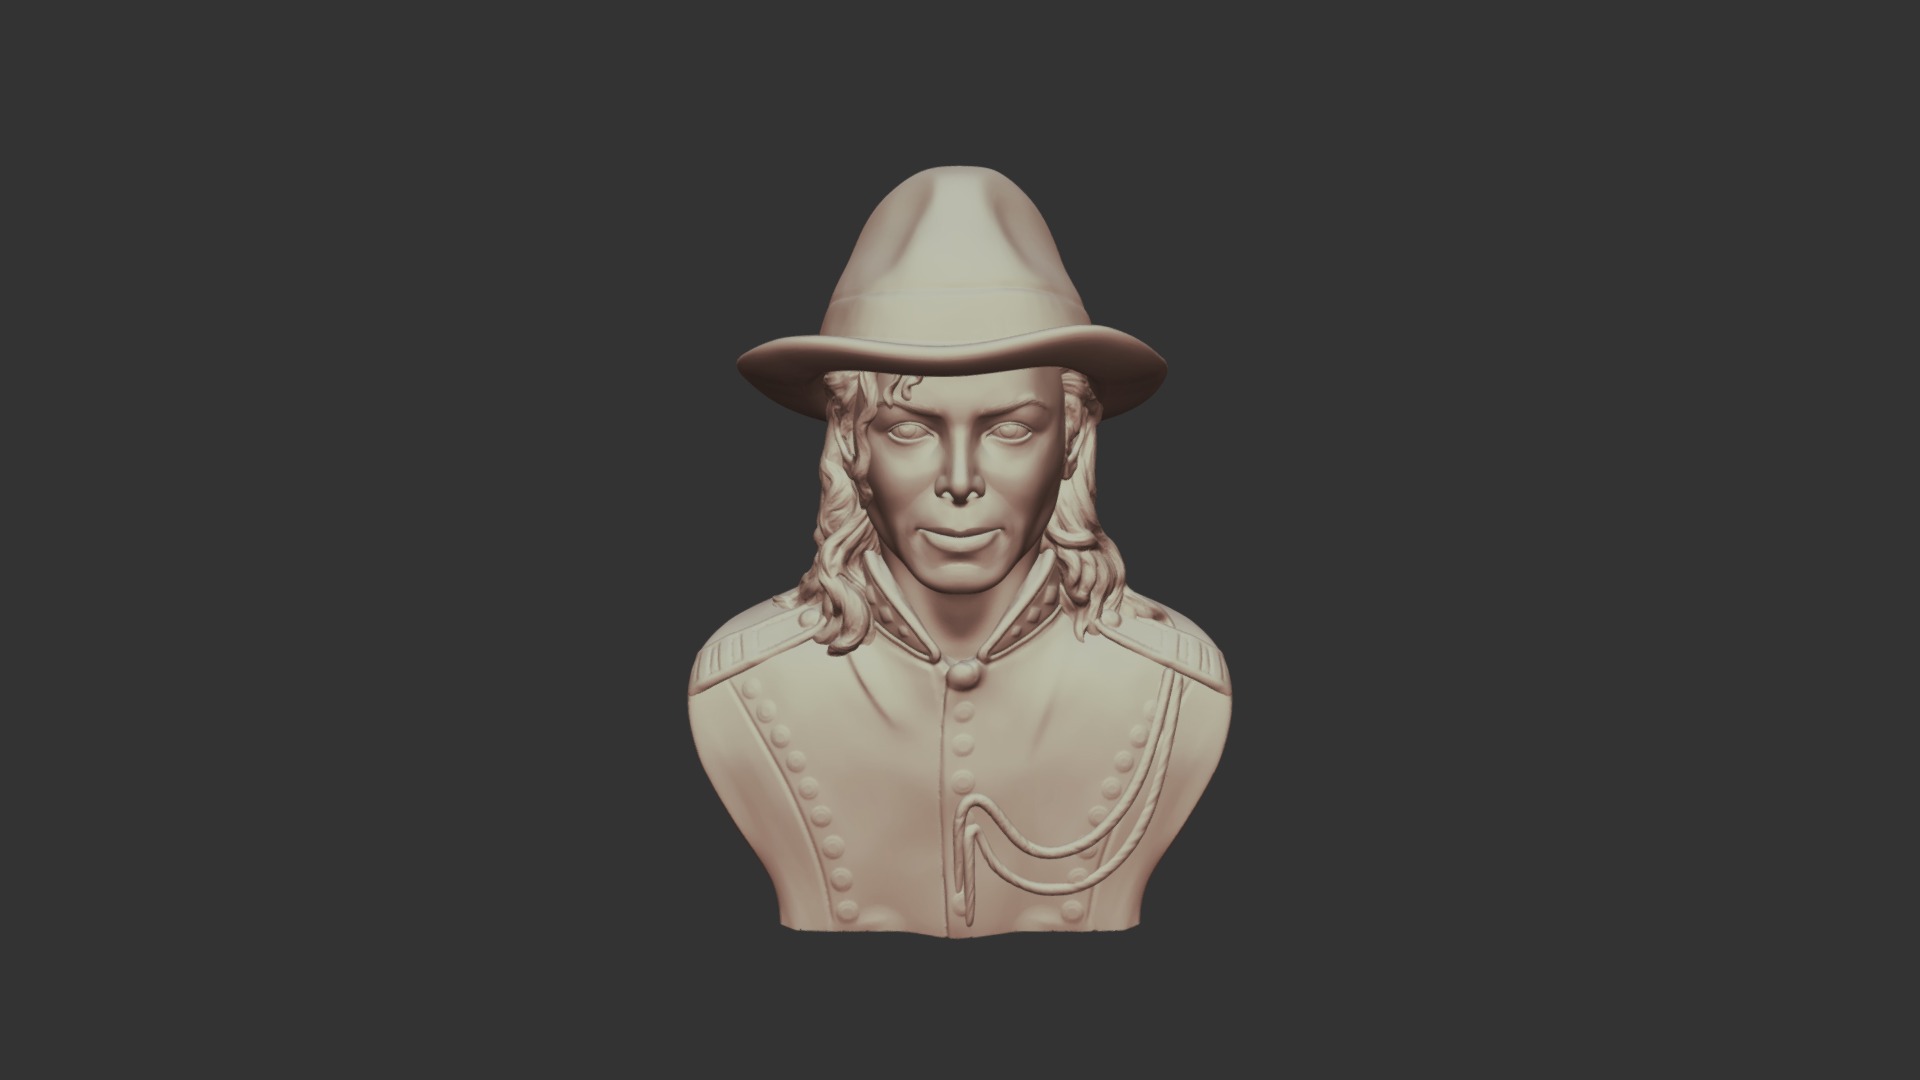 3D model Michael Jackson 3D sculpture - This is a 3D model of the Michael Jackson 3D sculpture. The 3D model is about a person wearing a hat.